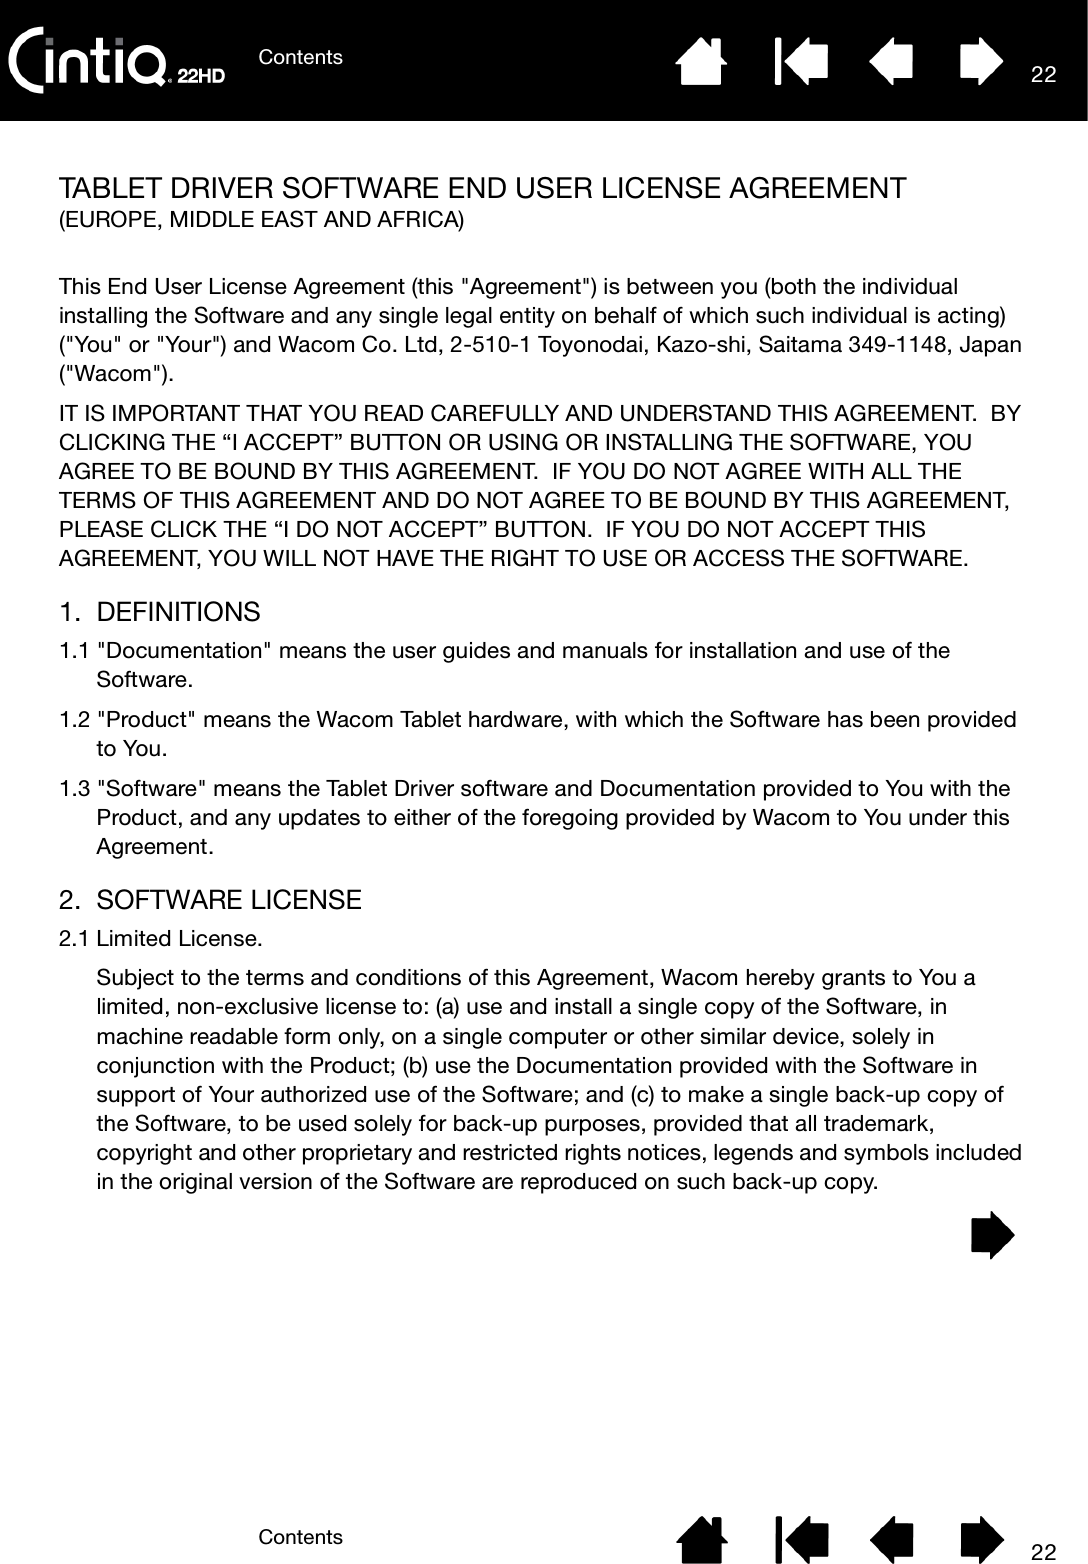 ContentsContents 2222TABLET DRIVER SOFTWARE END USER LICENSE AGREEMENT(EUROPE, MIDDLE EAST AND AFRICA)This End User License Agreement (this &quot;Agreement&quot;) is between you (both the individual installing the Software and any single legal entity on behalf of which such individual is acting) (&quot;You&quot; or &quot;Your&quot;) and Wacom Co. Ltd, 2-510-1 Toyonodai, Kazo-shi, Saitama 349-1148, Japan (&quot;Wacom&quot;). IT IS IMPORTANT THAT YOU READ CAREFULLY AND UNDERSTAND THIS AGREEMENT.  BY CLICKING THE “I ACCEPT” BUTTON OR USING OR INSTALLING THE SOFTWARE, YOU AGREE TO BE BOUND BY THIS AGREEMENT.  IF YOU DO NOT AGREE WITH ALL THE TERMS OF THIS AGREEMENT AND DO NOT AGREE TO BE BOUND BY THIS AGREEMENT, PLEASE CLICK THE “I DO NOT ACCEPT” BUTTON.  IF YOU DO NOT ACCEPT THIS AGREEMENT, YOU WILL NOT HAVE THE RIGHT TO USE OR ACCESS THE SOFTWARE.1. DEFINITIONS1.1 &quot;Documentation&quot; means the user guides and manuals for installation and use of the Software. 1.2 &quot;Product&quot; means the Wacom Tablet hardware, with which the Software has been provided to You. 1.3 &quot;Software&quot; means the Tablet Driver software and Documentation provided to You with the Product, and any updates to either of the foregoing provided by Wacom to You under this Agreement.2. SOFTWARE LICENSE2.1 Limited License.Subject to the terms and conditions of this Agreement, Wacom hereby grants to You a limited, non-exclusive license to: (a) use and install a single copy of the Software, in machine readable form only, on a single computer or other similar device, solely in conjunction with the Product; (b) use the Documentation provided with the Software in support of Your authorized use of the Software; and (c) to make a single back-up copy of the Software, to be used solely for back-up purposes, provided that all trademark, copyright and other proprietary and restricted rights notices, legends and symbols included in the original version of the Software are reproduced on such back-up copy.